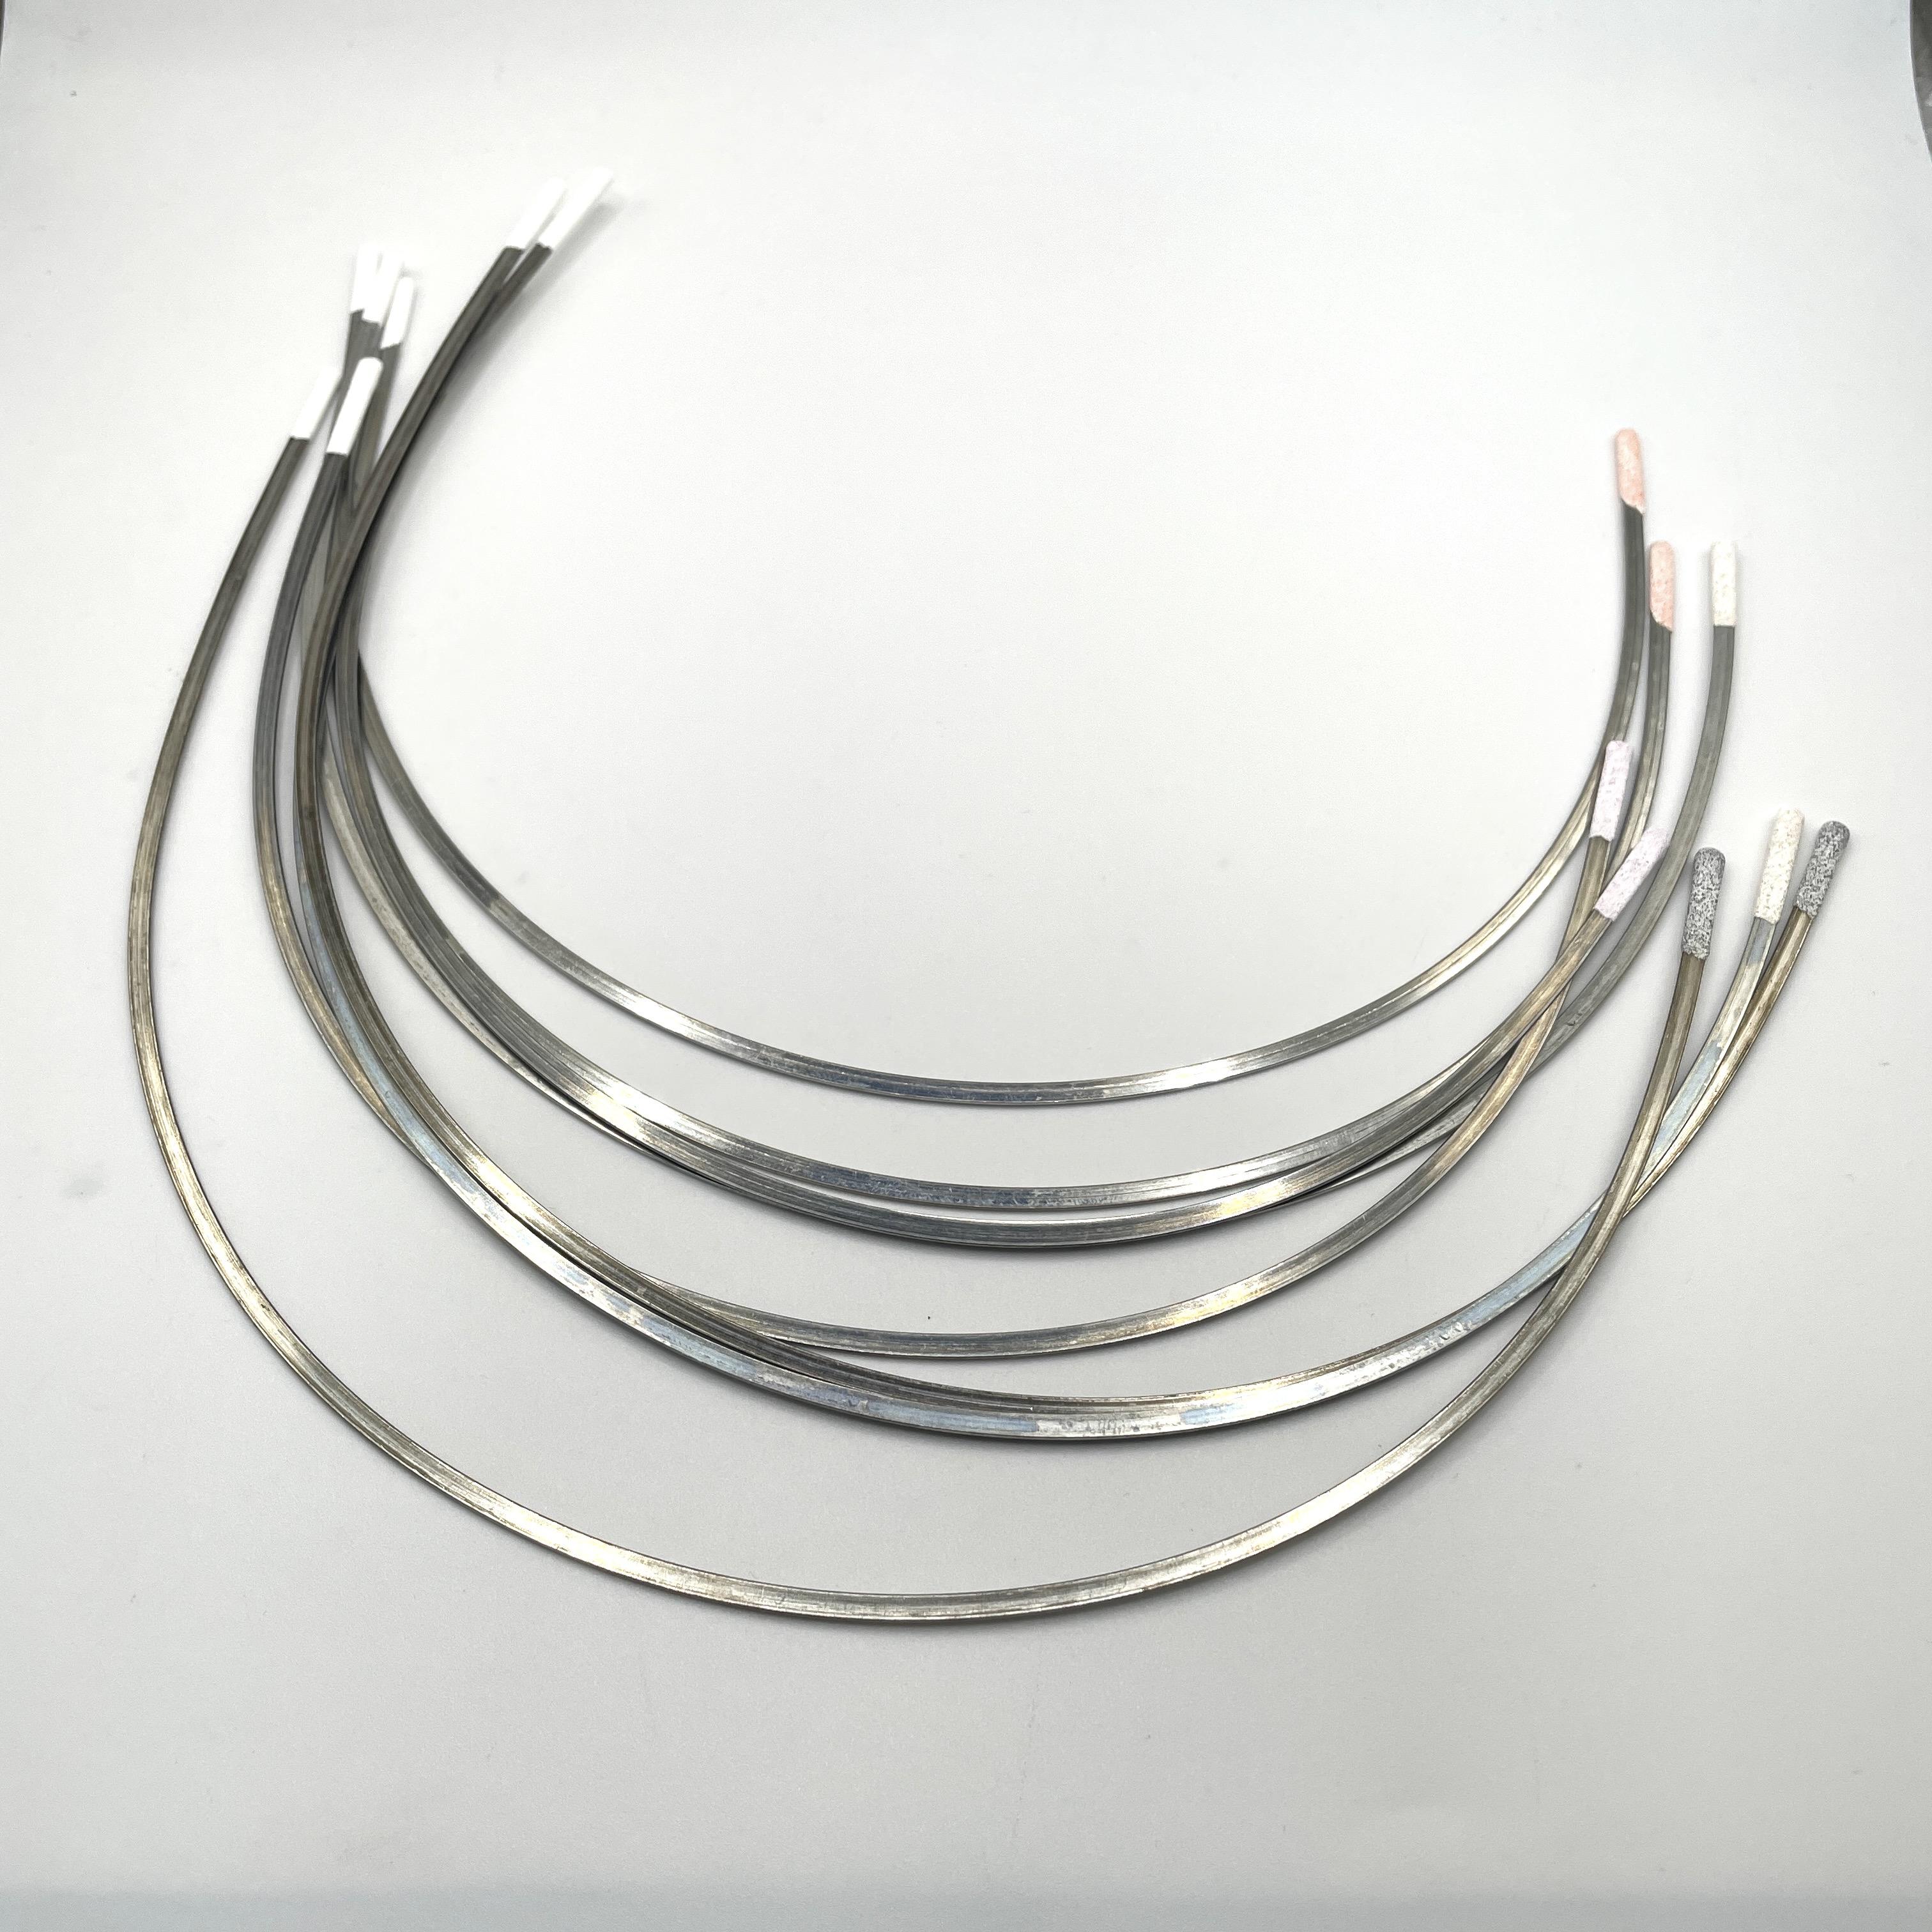 Bra Wires - Stainless steel, with coated tips - style VT1 - per pair